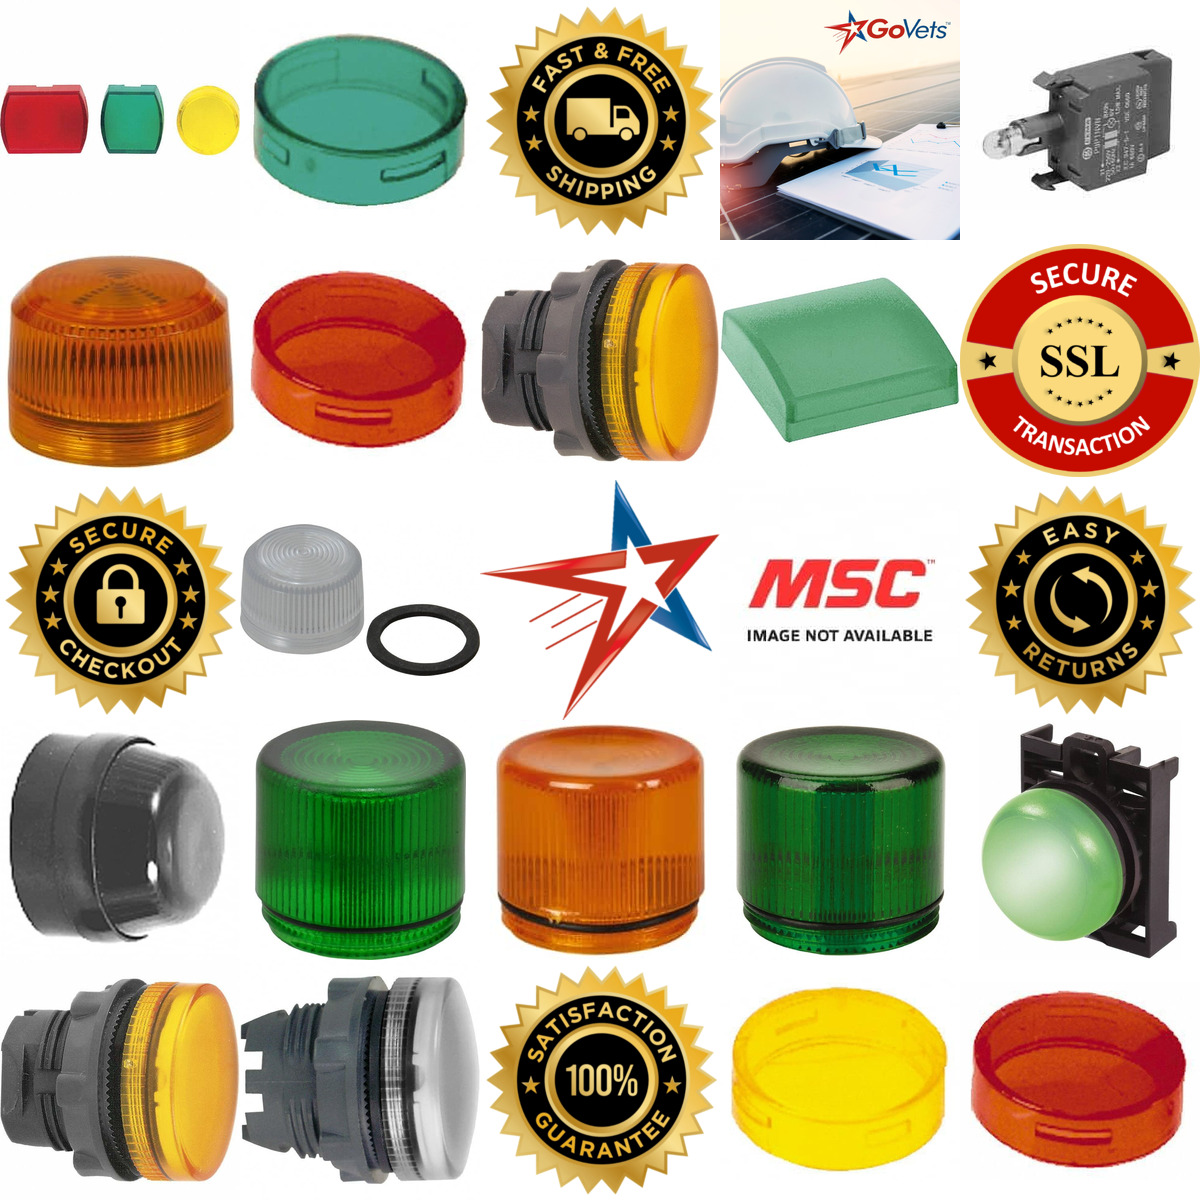 A selection of Pilot and Indicator Light Accessories products on GoVets